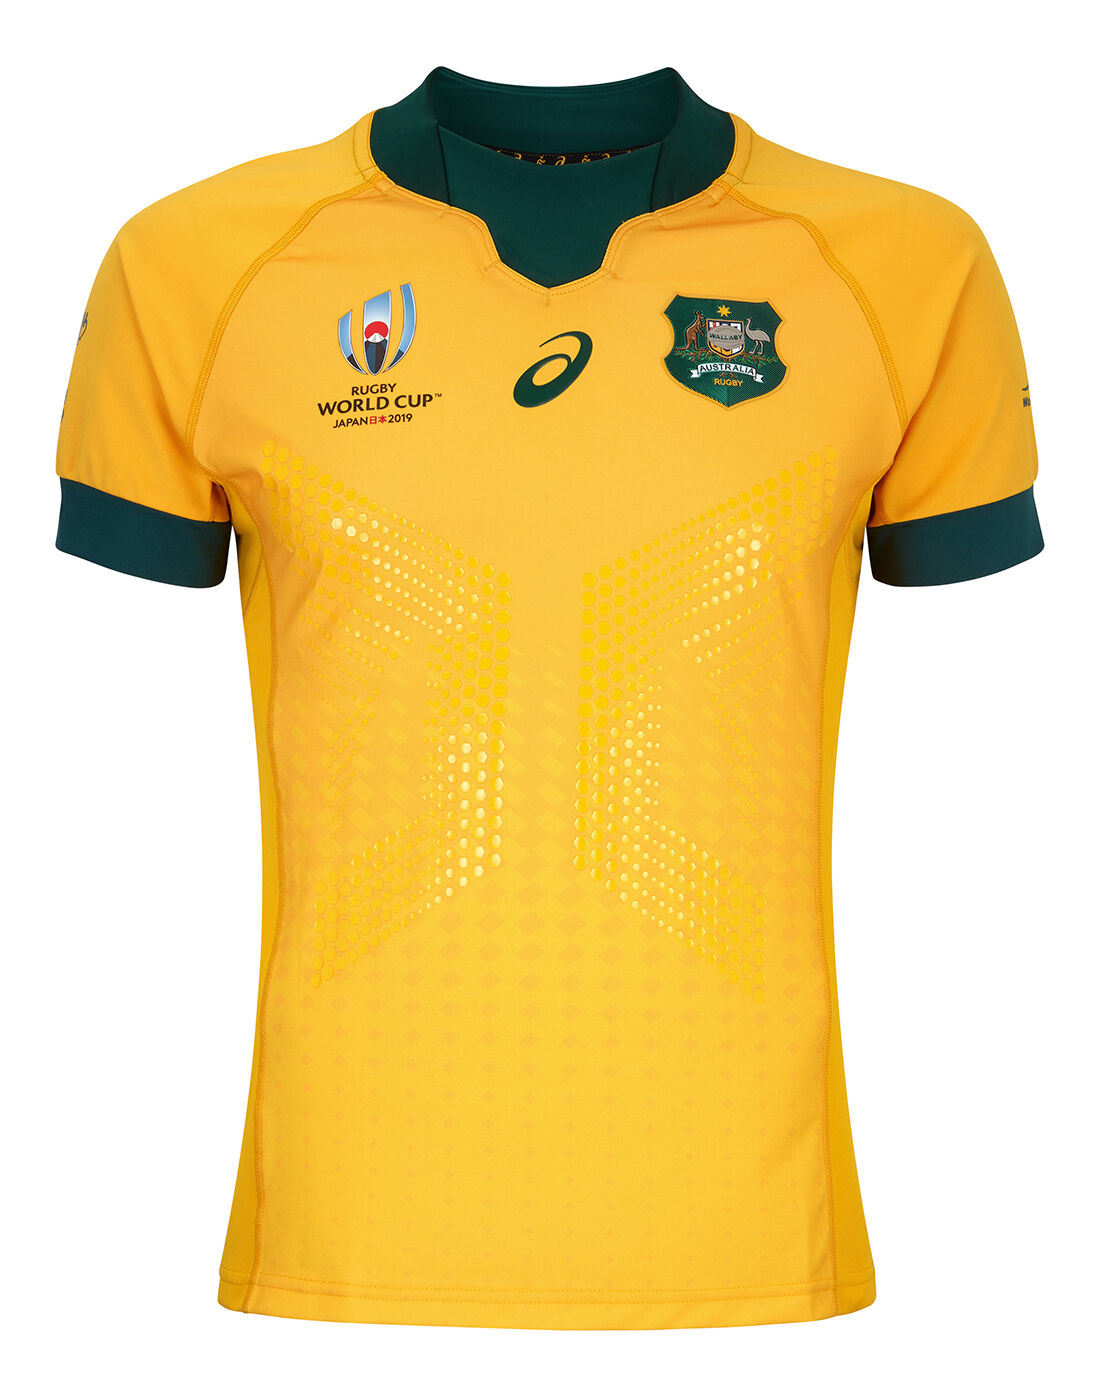 australia world cup jersey 2019 rugby